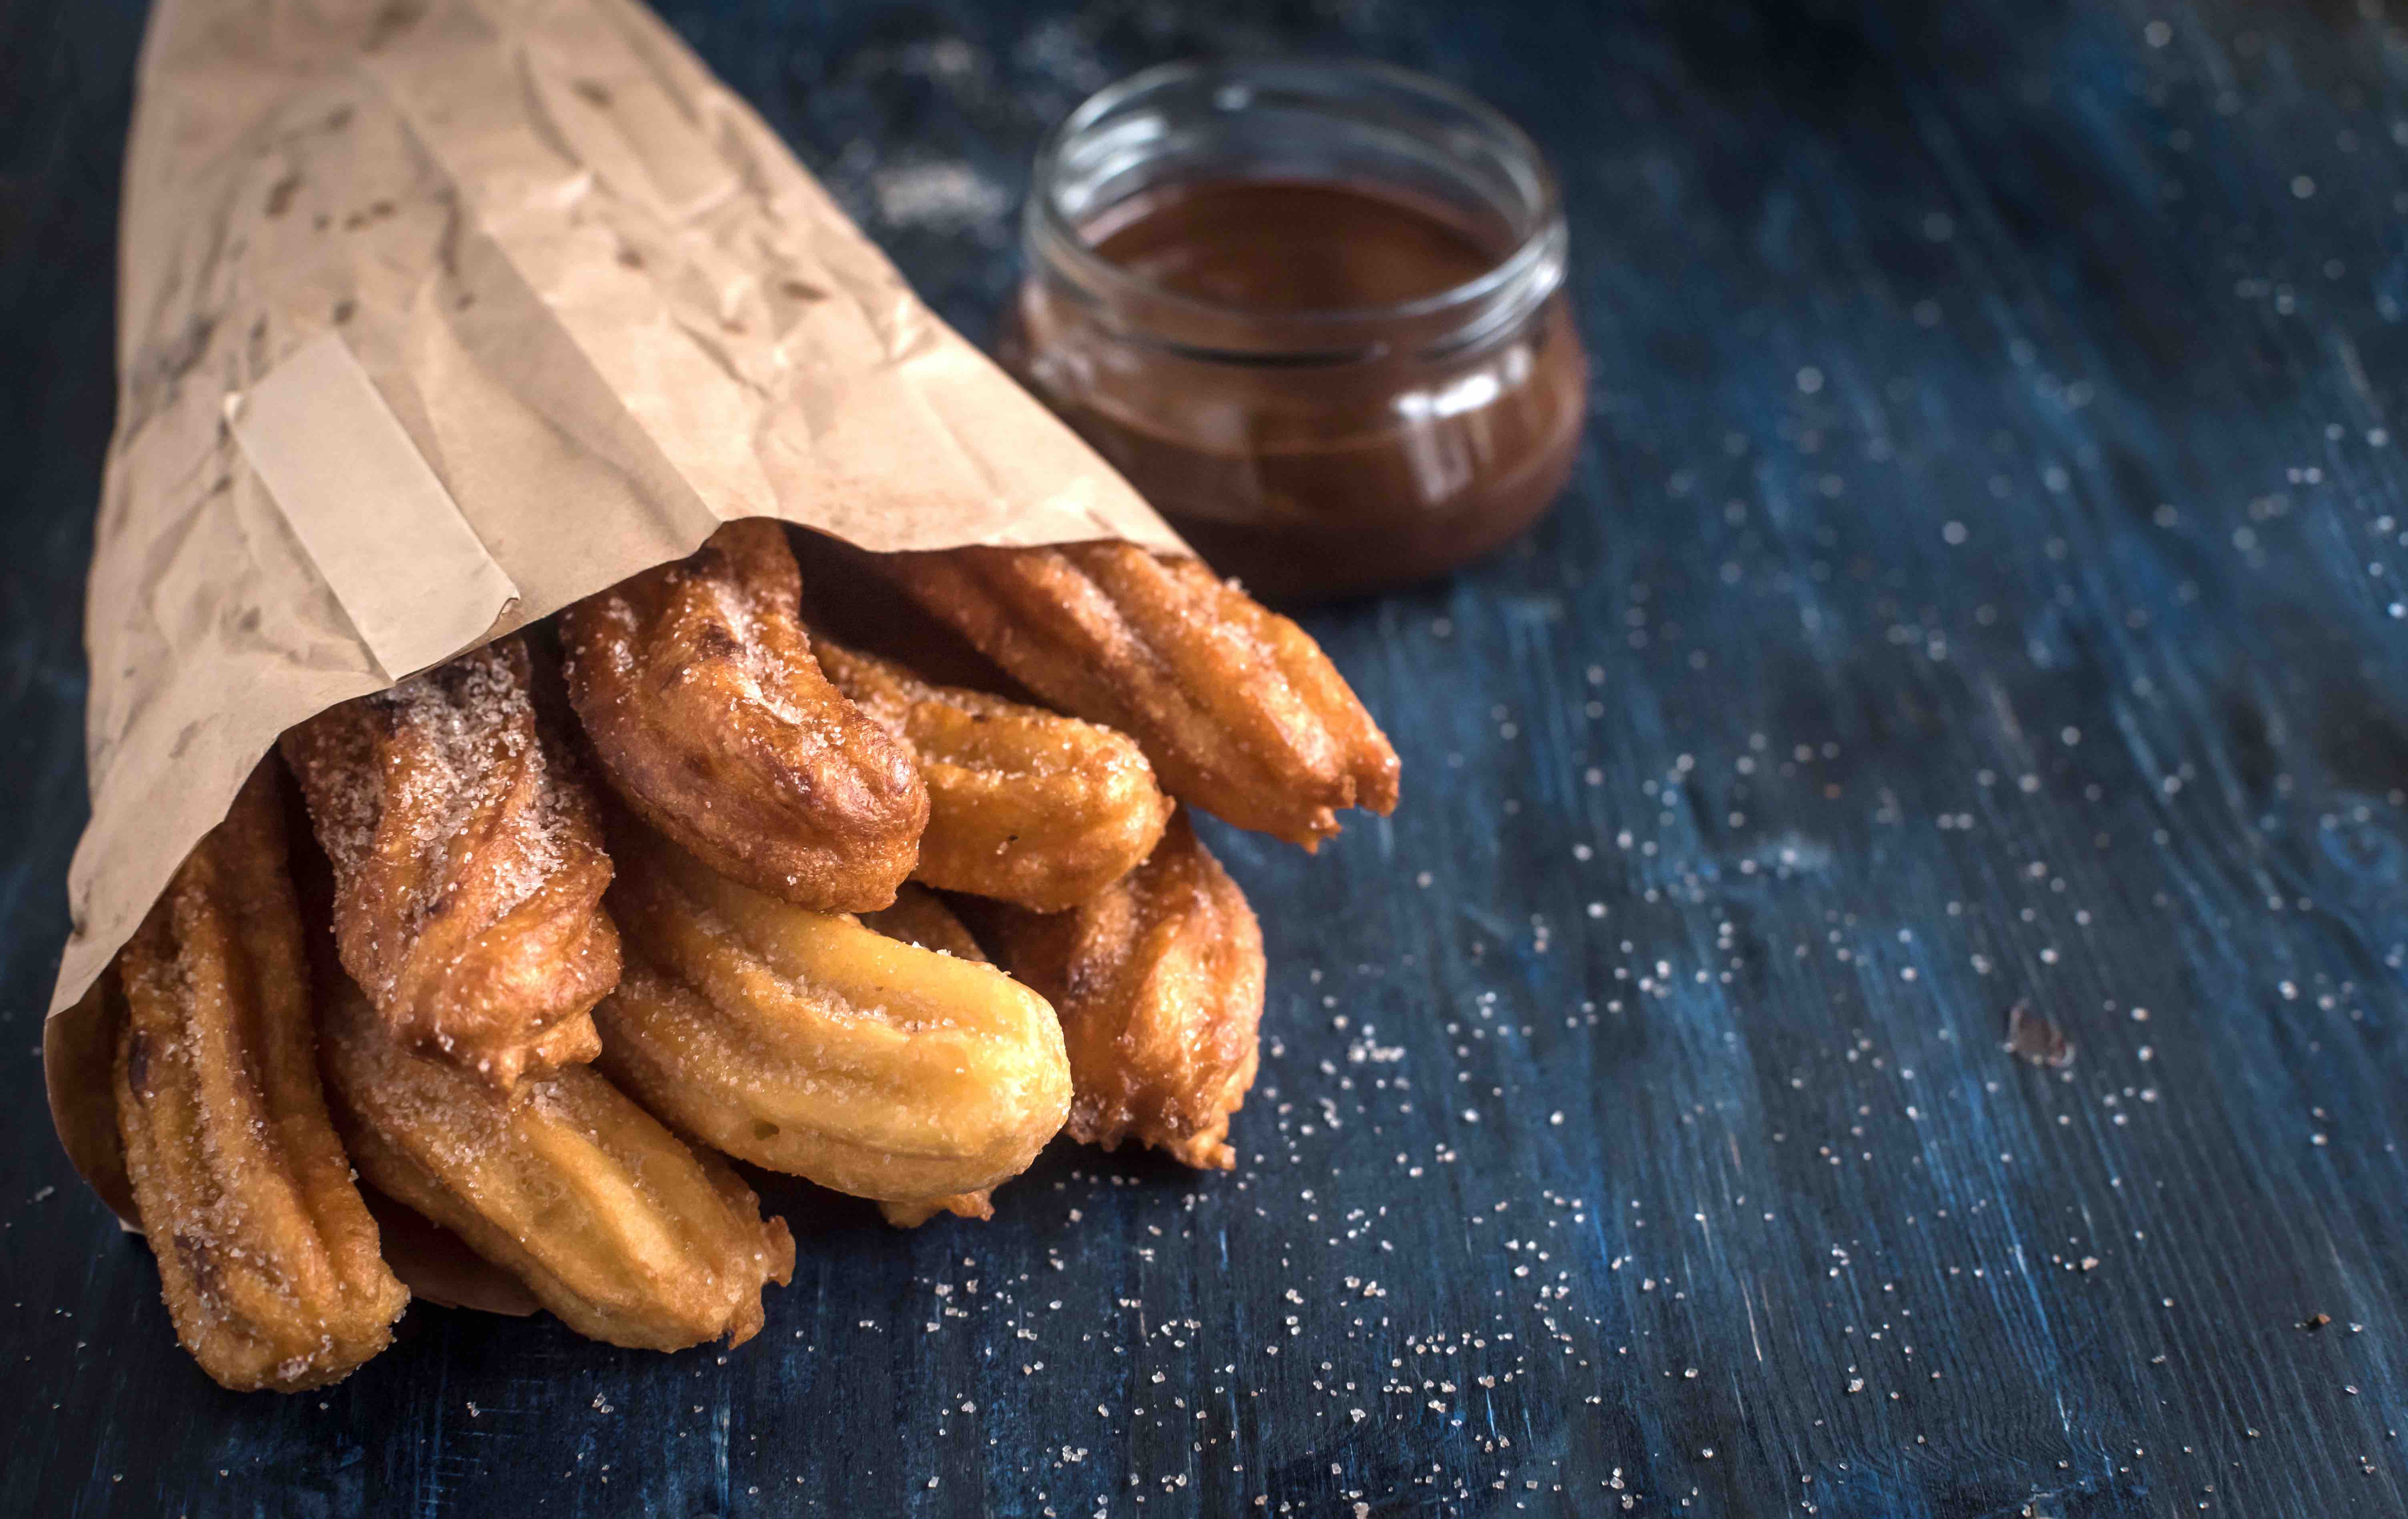 15 Facts About Churros: Delicious Origins To Global Variations - Facts.net